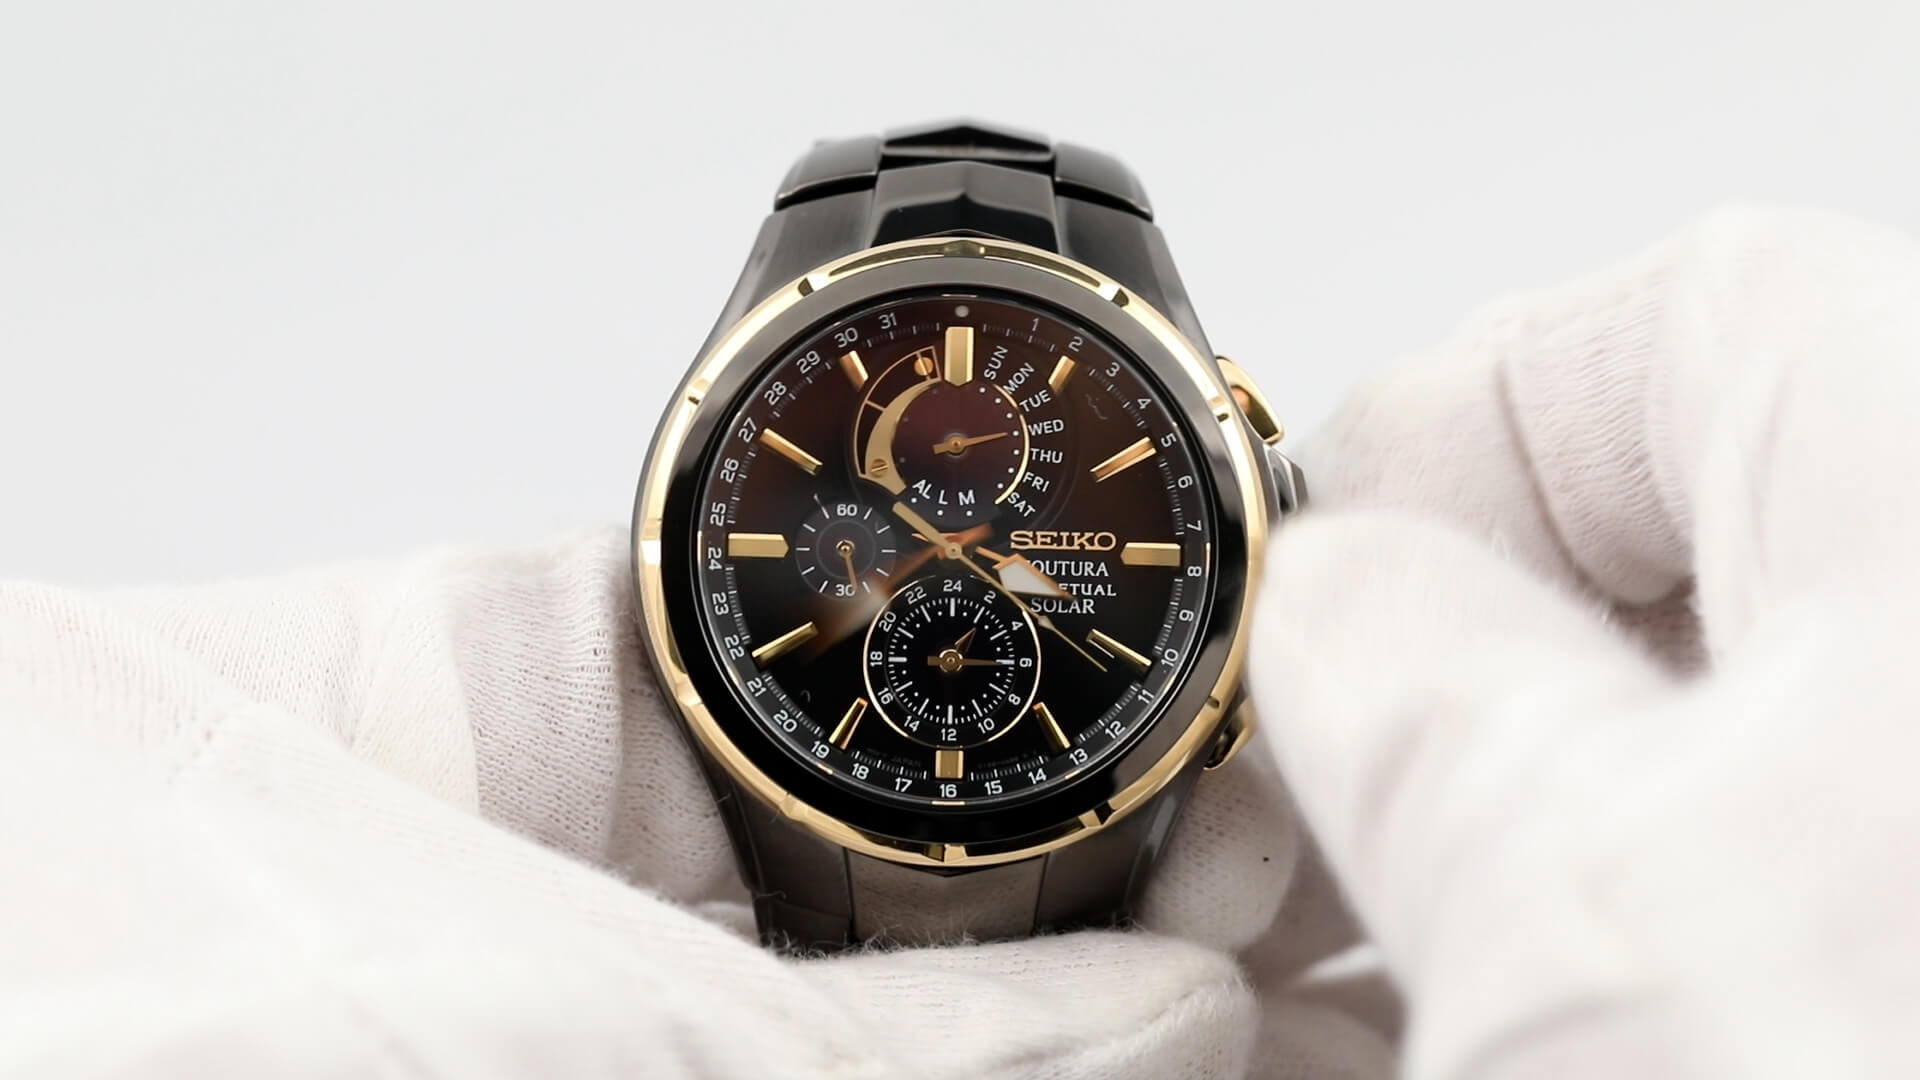 How To Set The Time On A Seiko Perpetual calendar watch